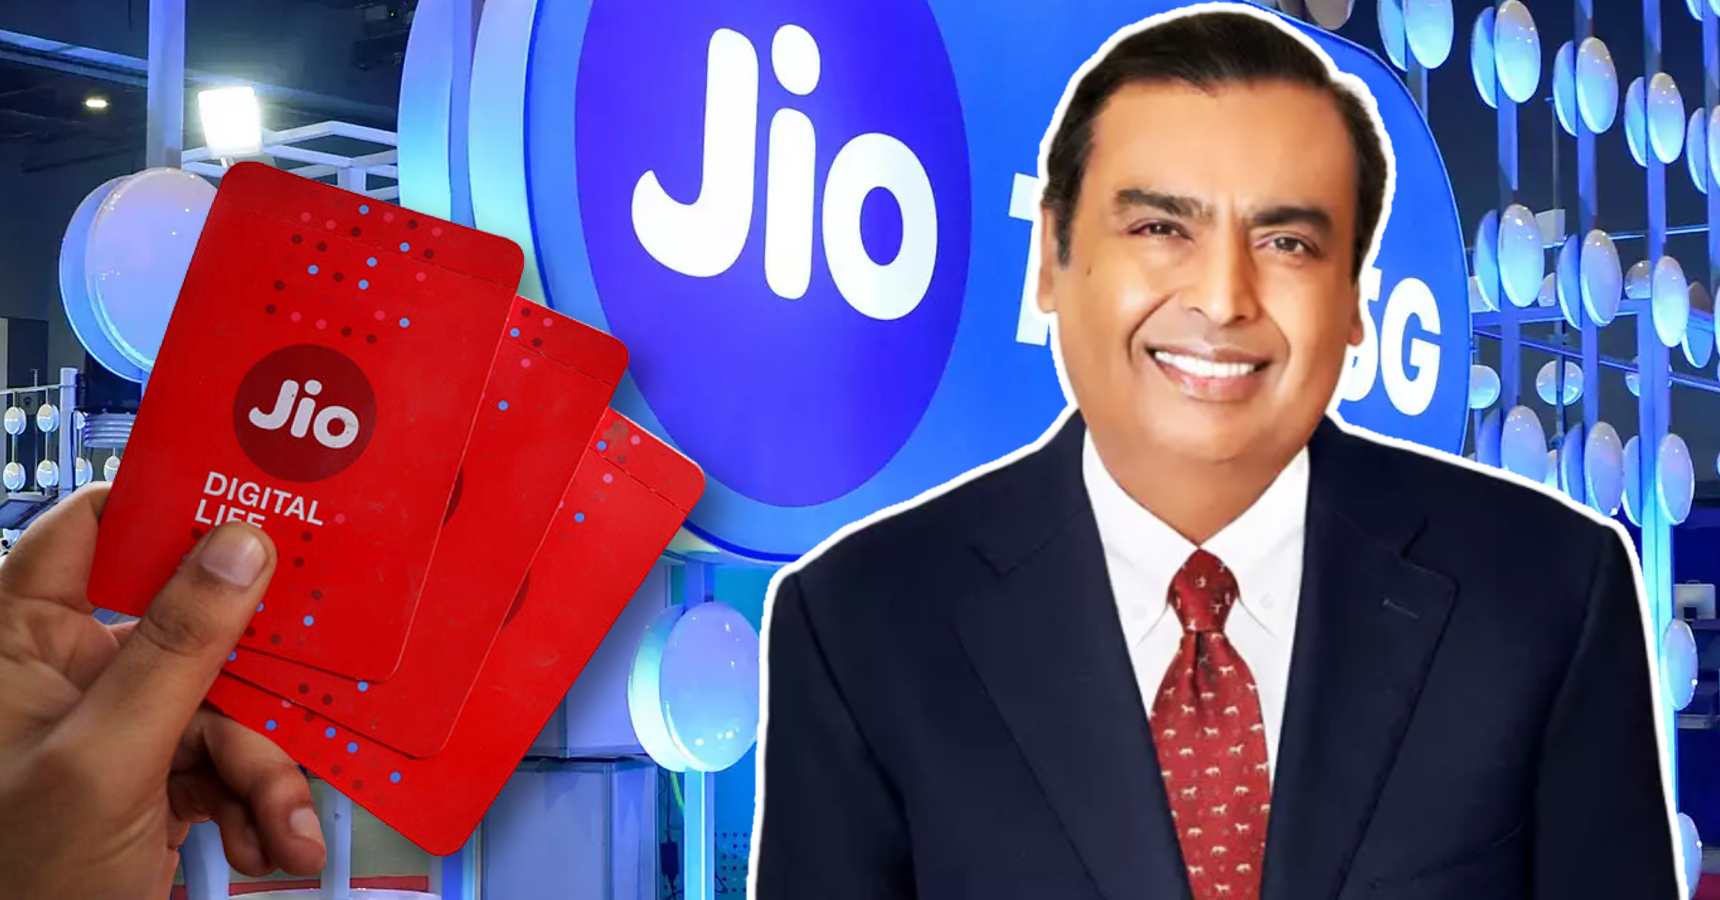 Reliance Jio Unlimited Calling High Speed Data Plan for One Year with Amazing benefits